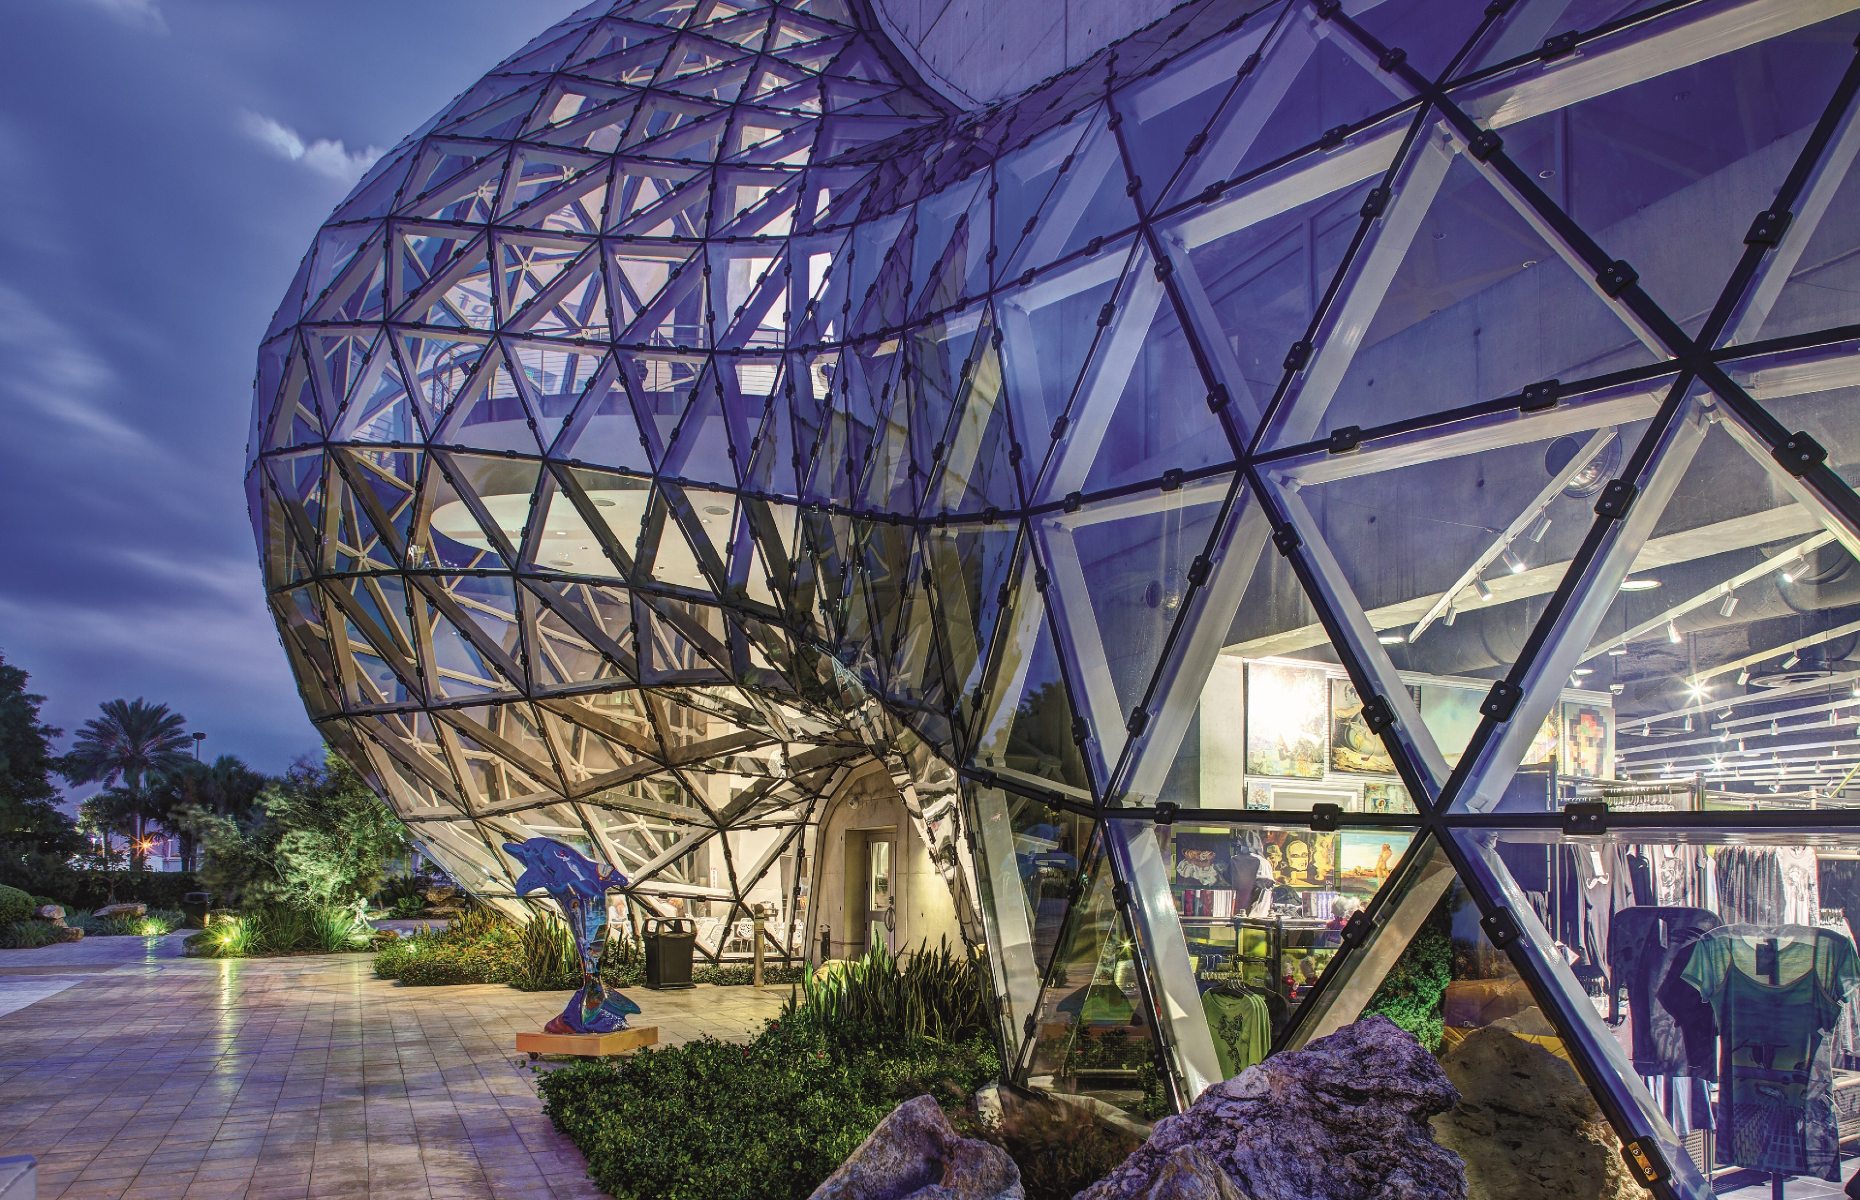 The crystal style architecture at the back of the Dali Museum (Image: Courtesy of VisitStPeteClearwater.com)